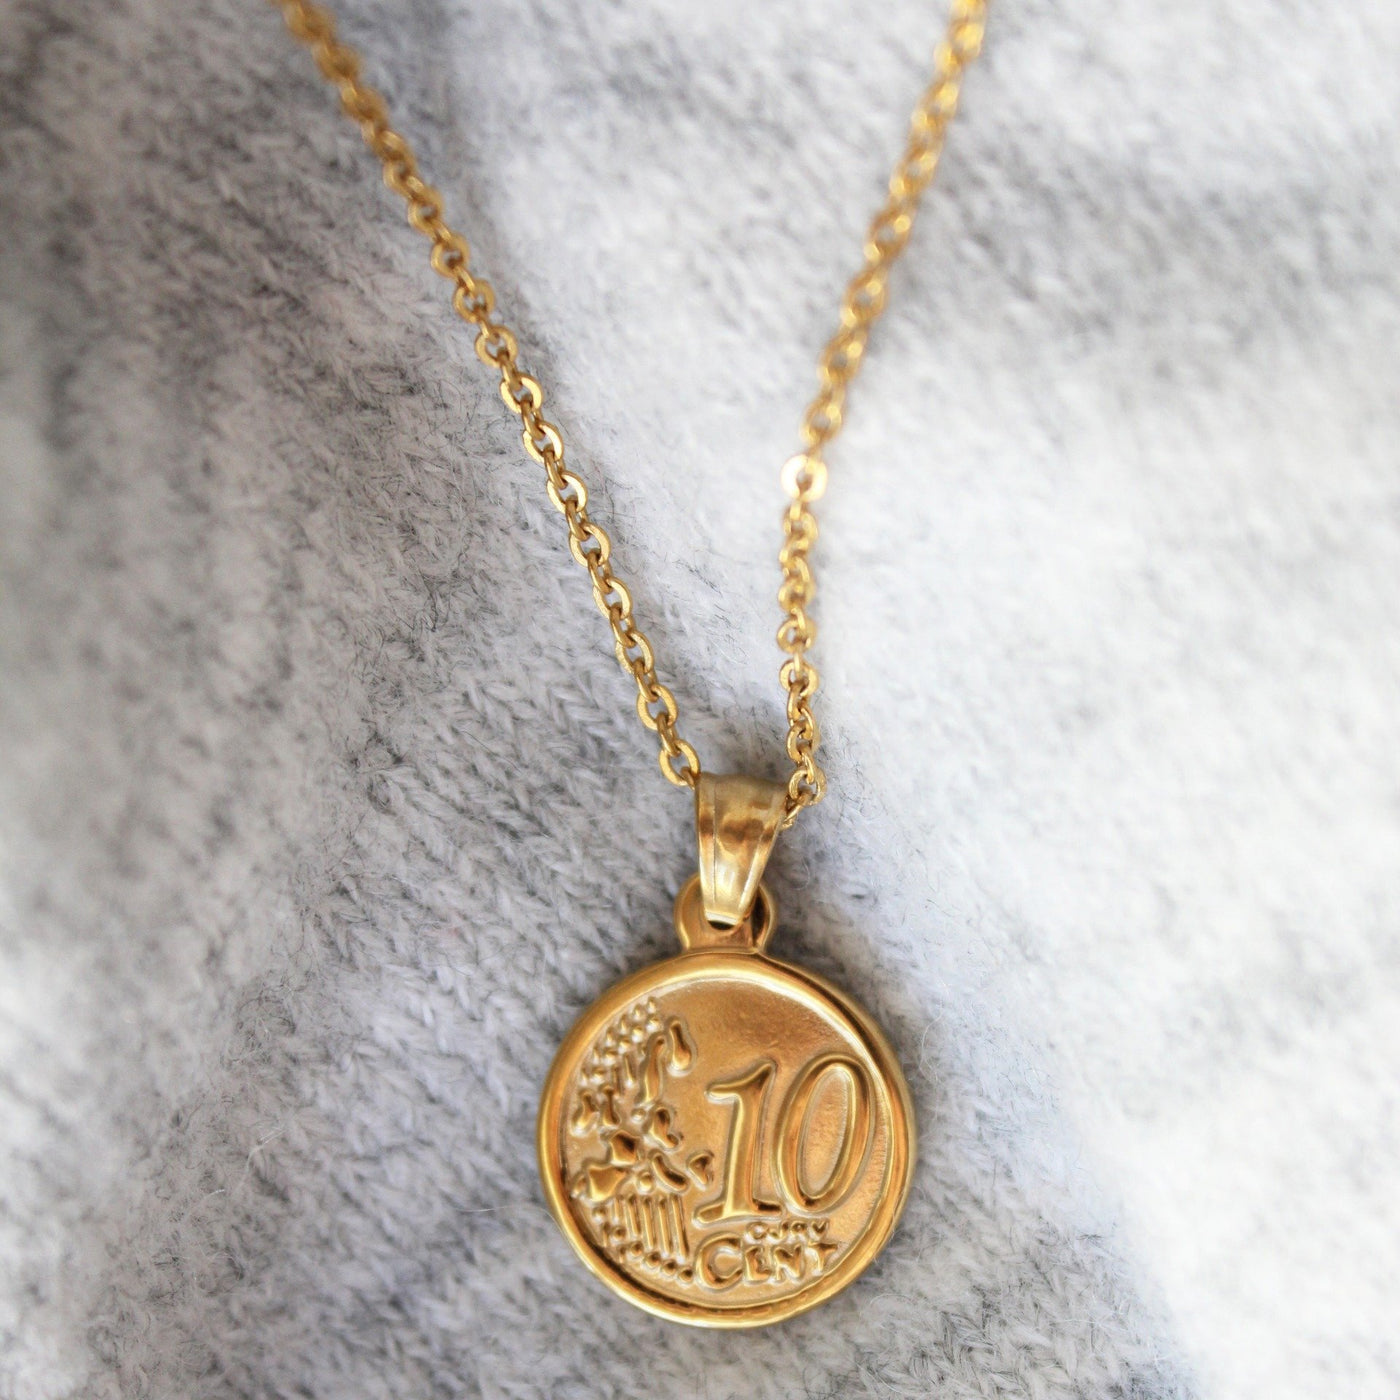 10 Cent Gold Necklace - Maral Kunst Jewelry